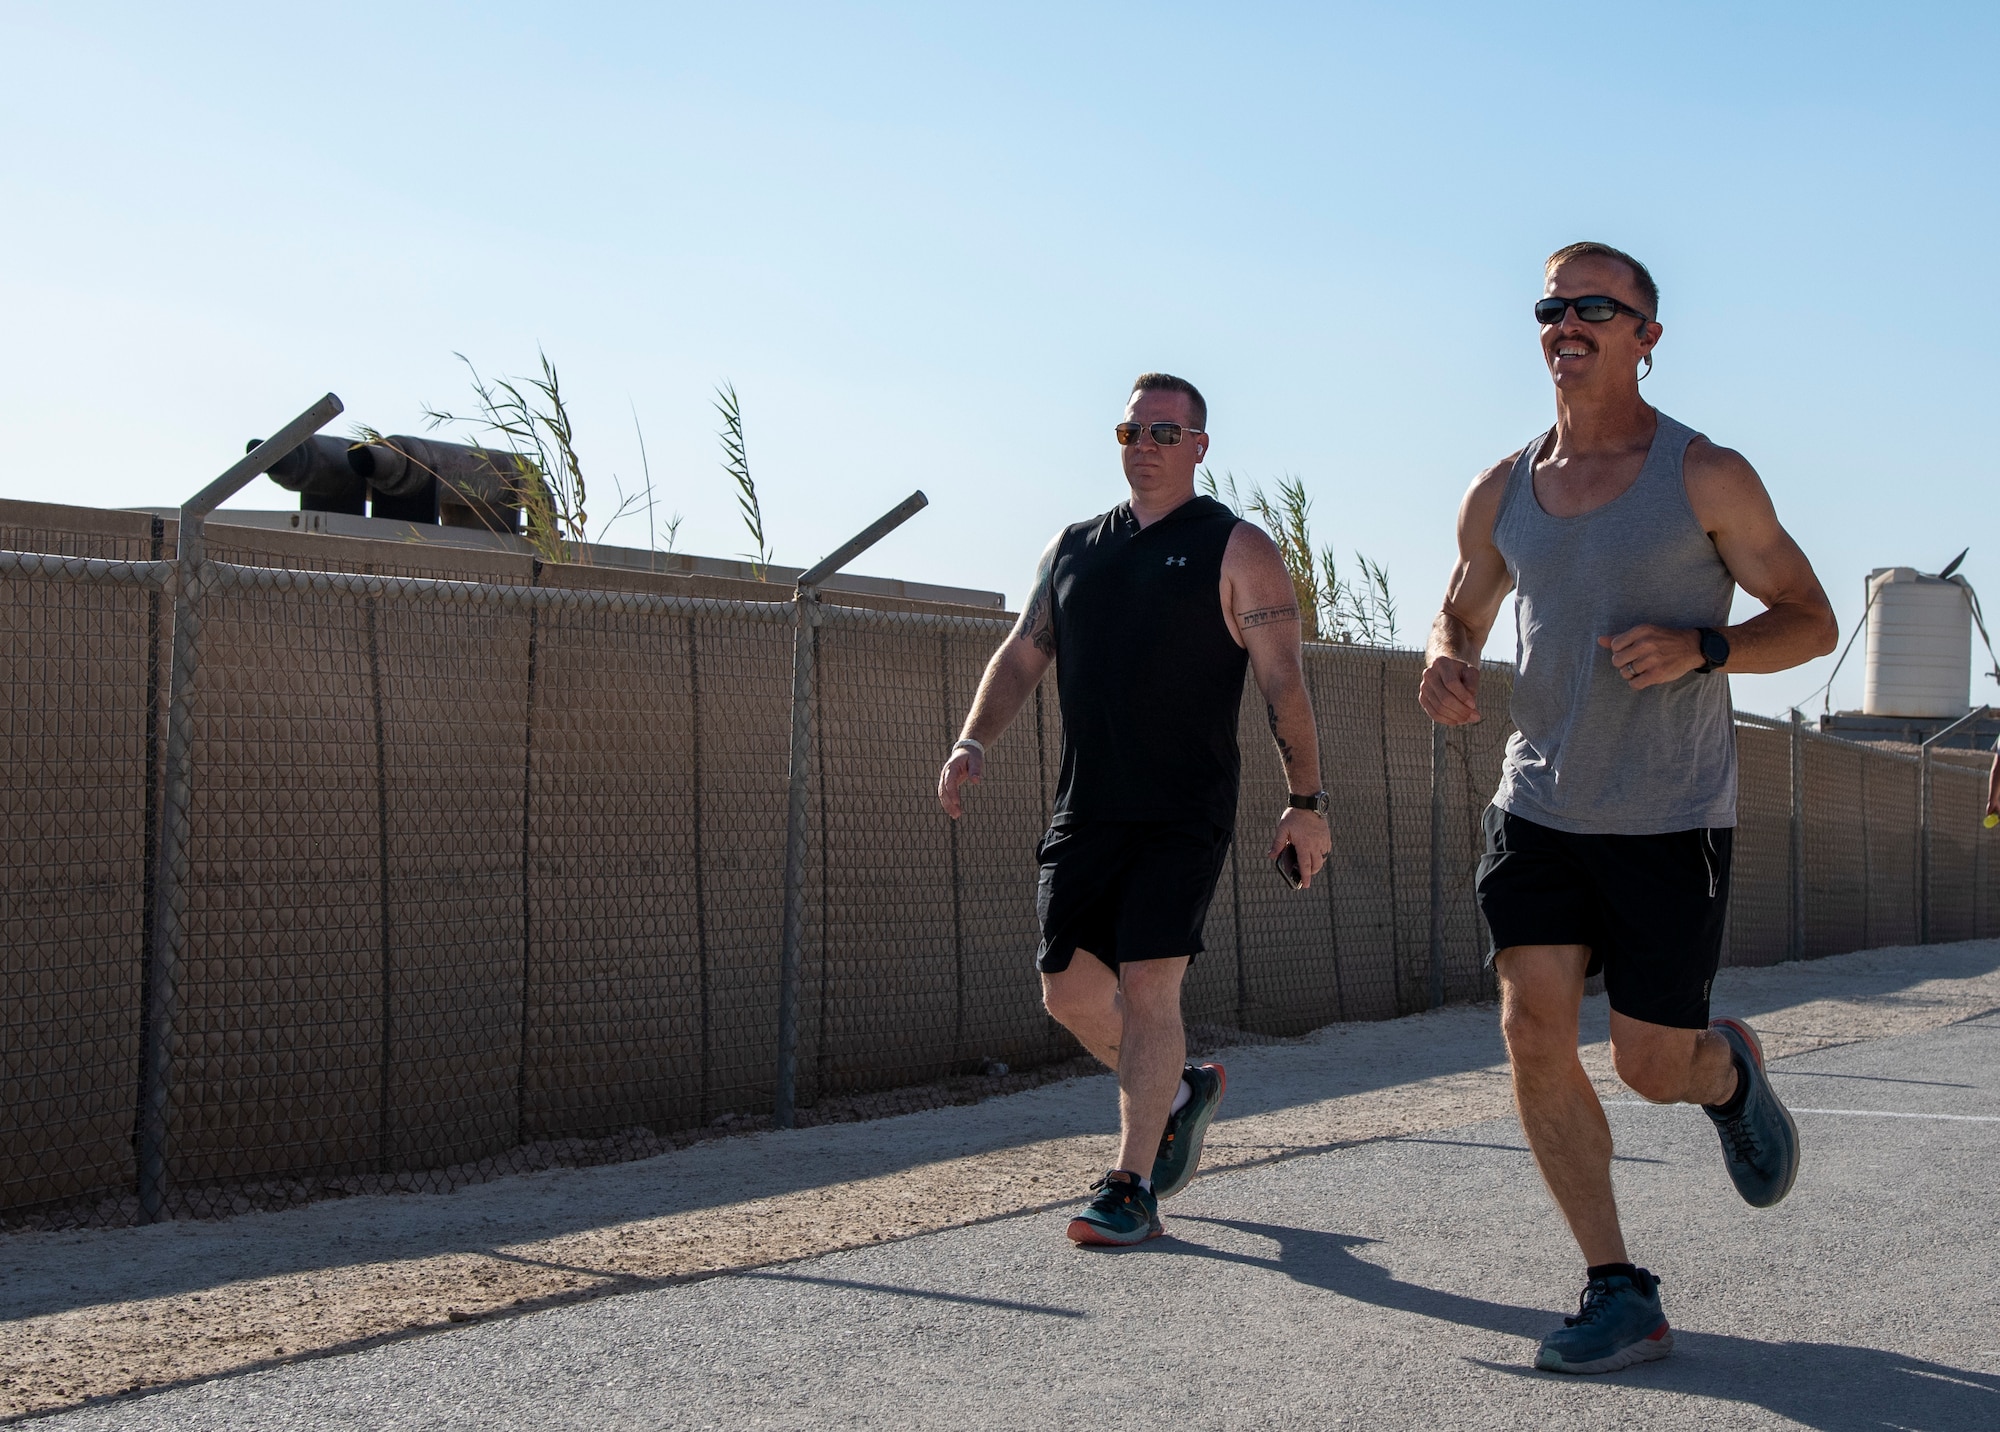 Red Tail Shield, the Chapel Corps, and Mental Health personnel at the 332d Air Expeditionary Wing host a 2.2 kilometer or 22 lap fun run for Suicide Prevention Awareness Month at an undisclosed location in Southwest Asia, Sept. 22, 2022. The run is being held to connect airmen to agencies that seek to address the causes of suicide before it is too late. Airmen run either 2.2 kilometers or 22 laps around the track to memorialize the 22 veterans who commit suicide daily on average. (U.S. Air Force photo by: Tech. Sgt. Jim Bentley)